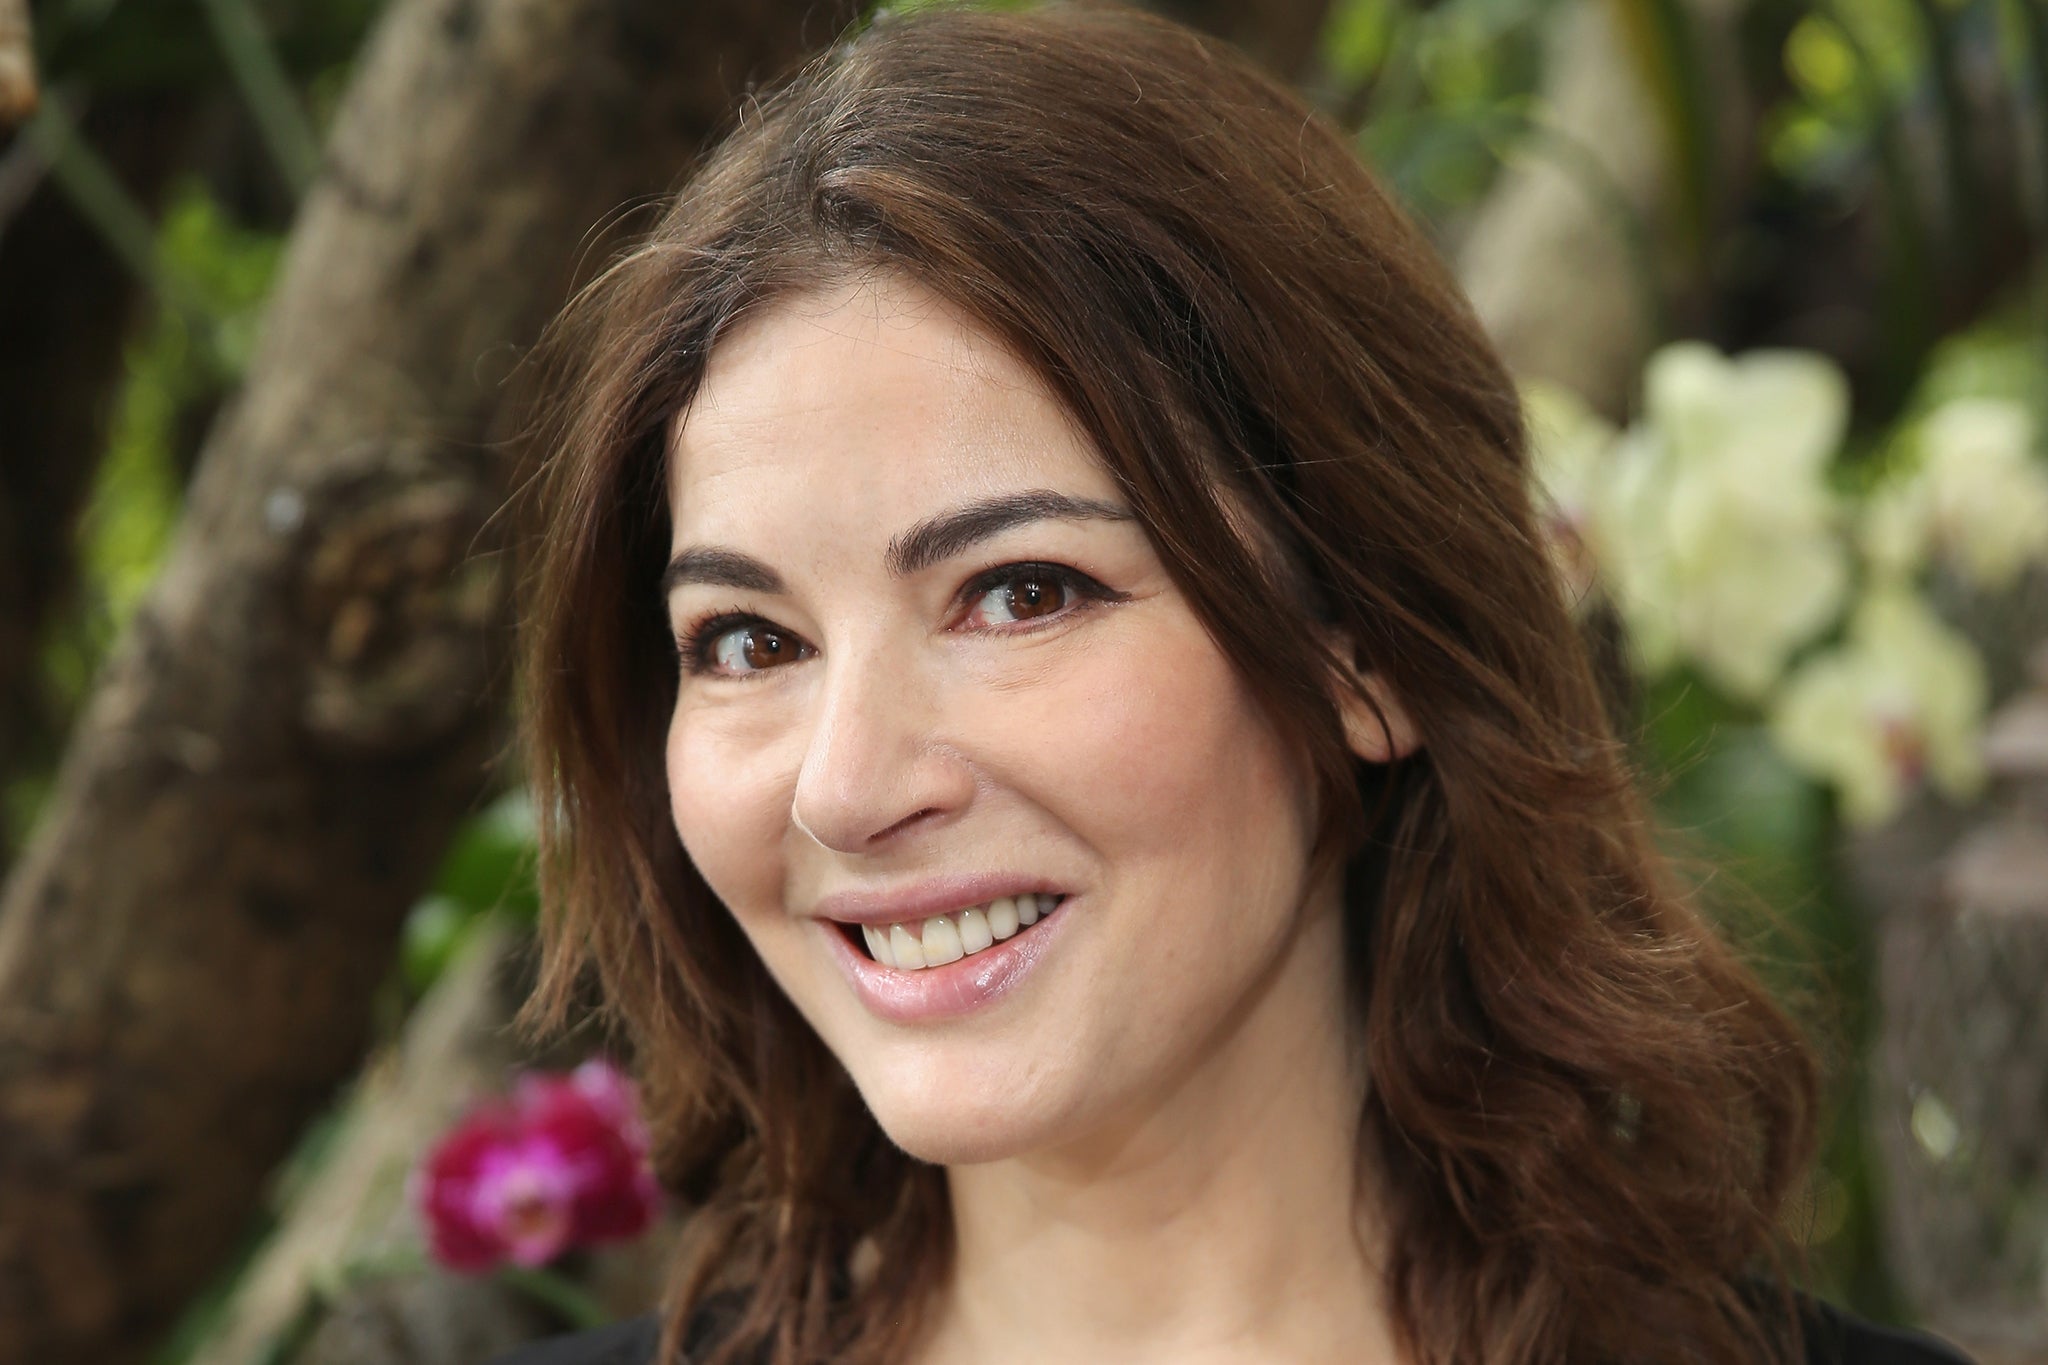 Nigella Lawson is as over dinner parties as I am – but for very different reasons